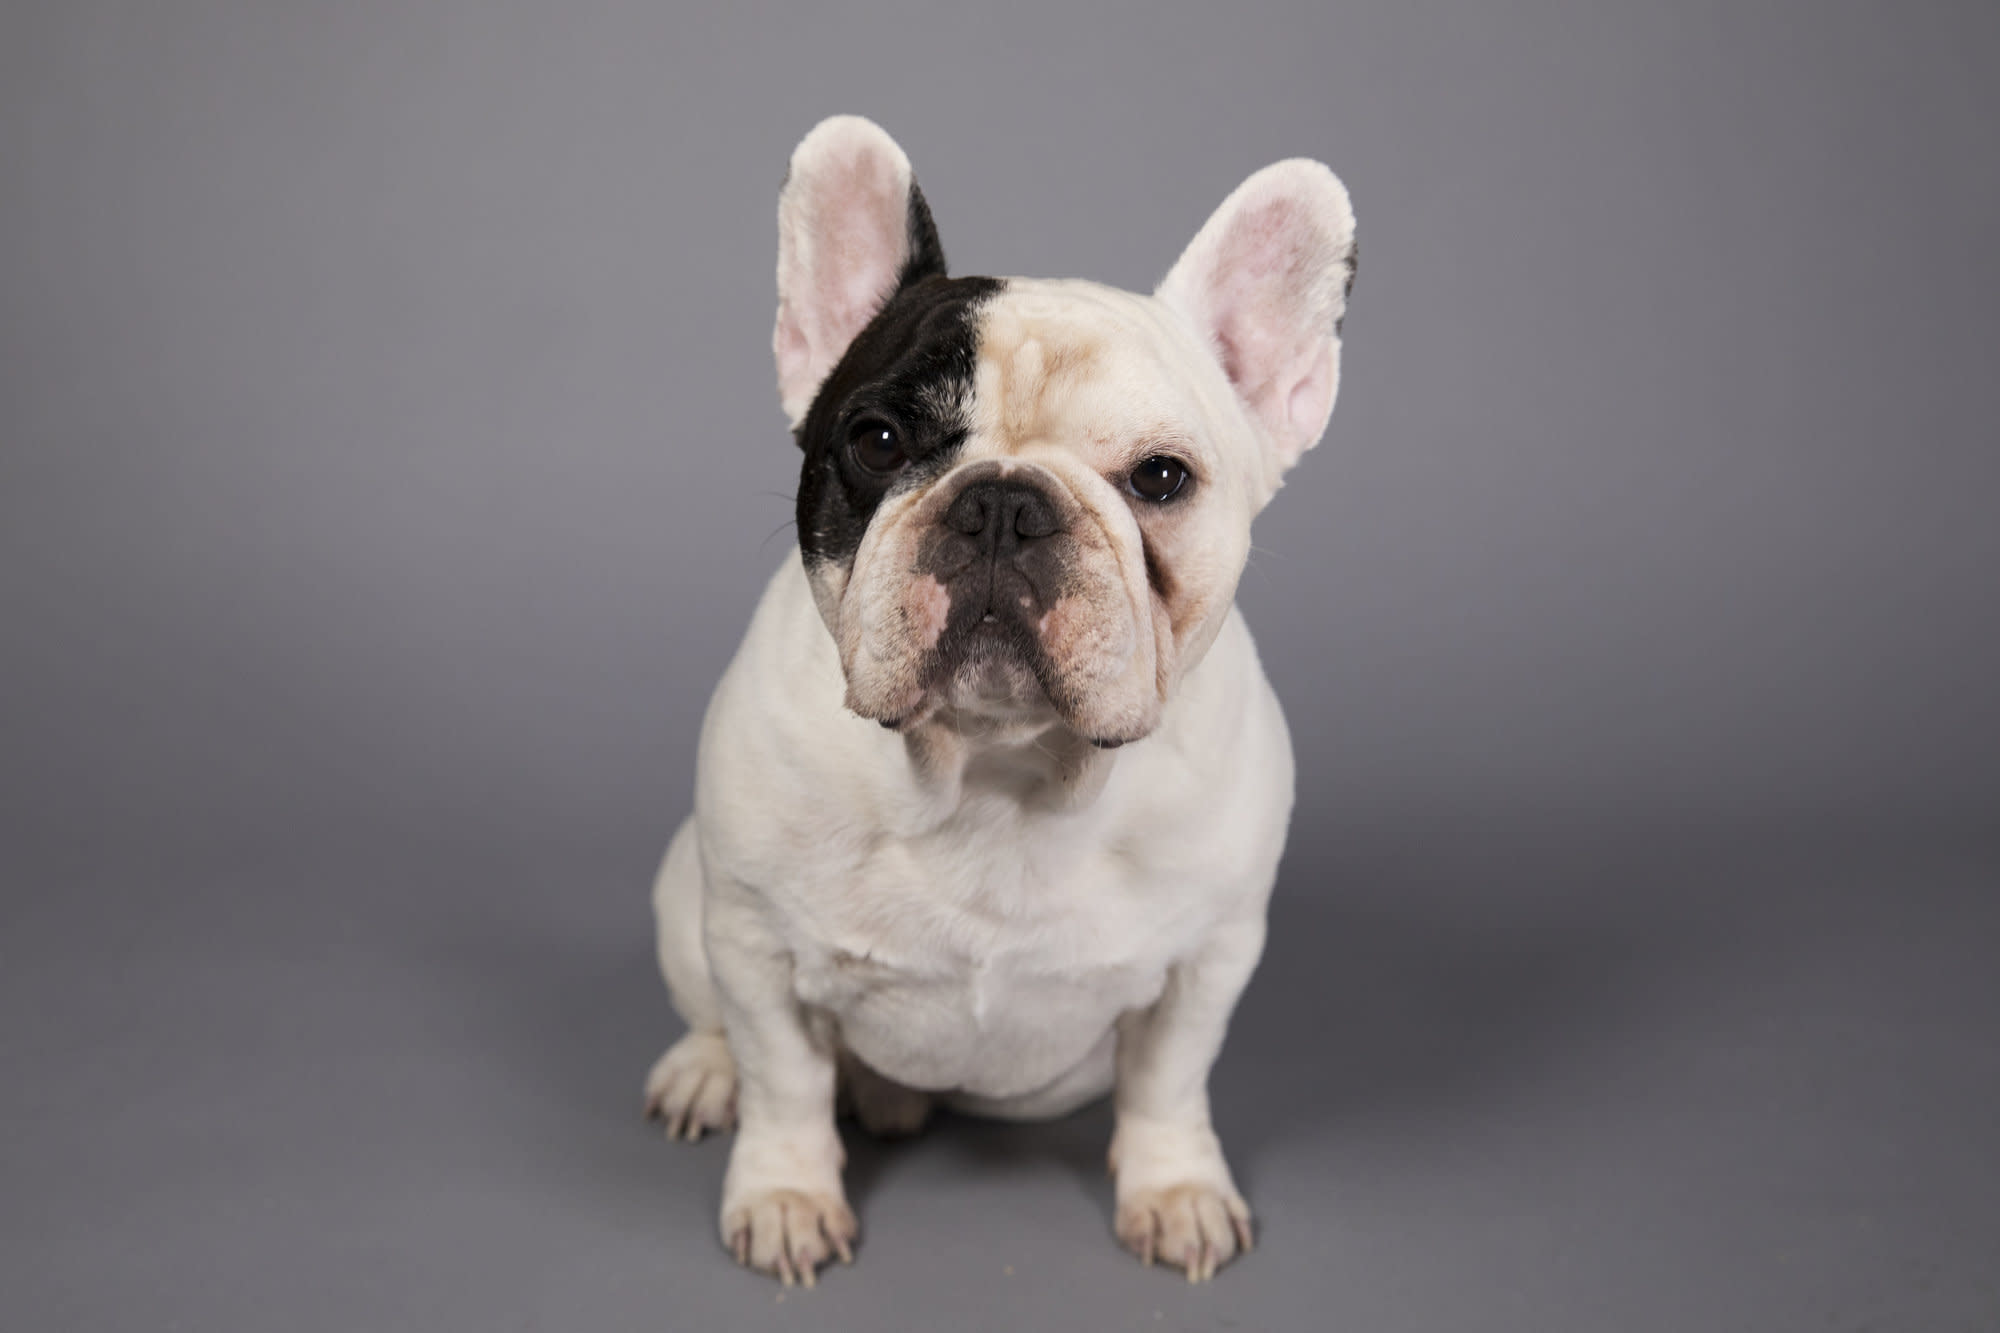 Manny the Frenchie's owners tell how to build a social media following